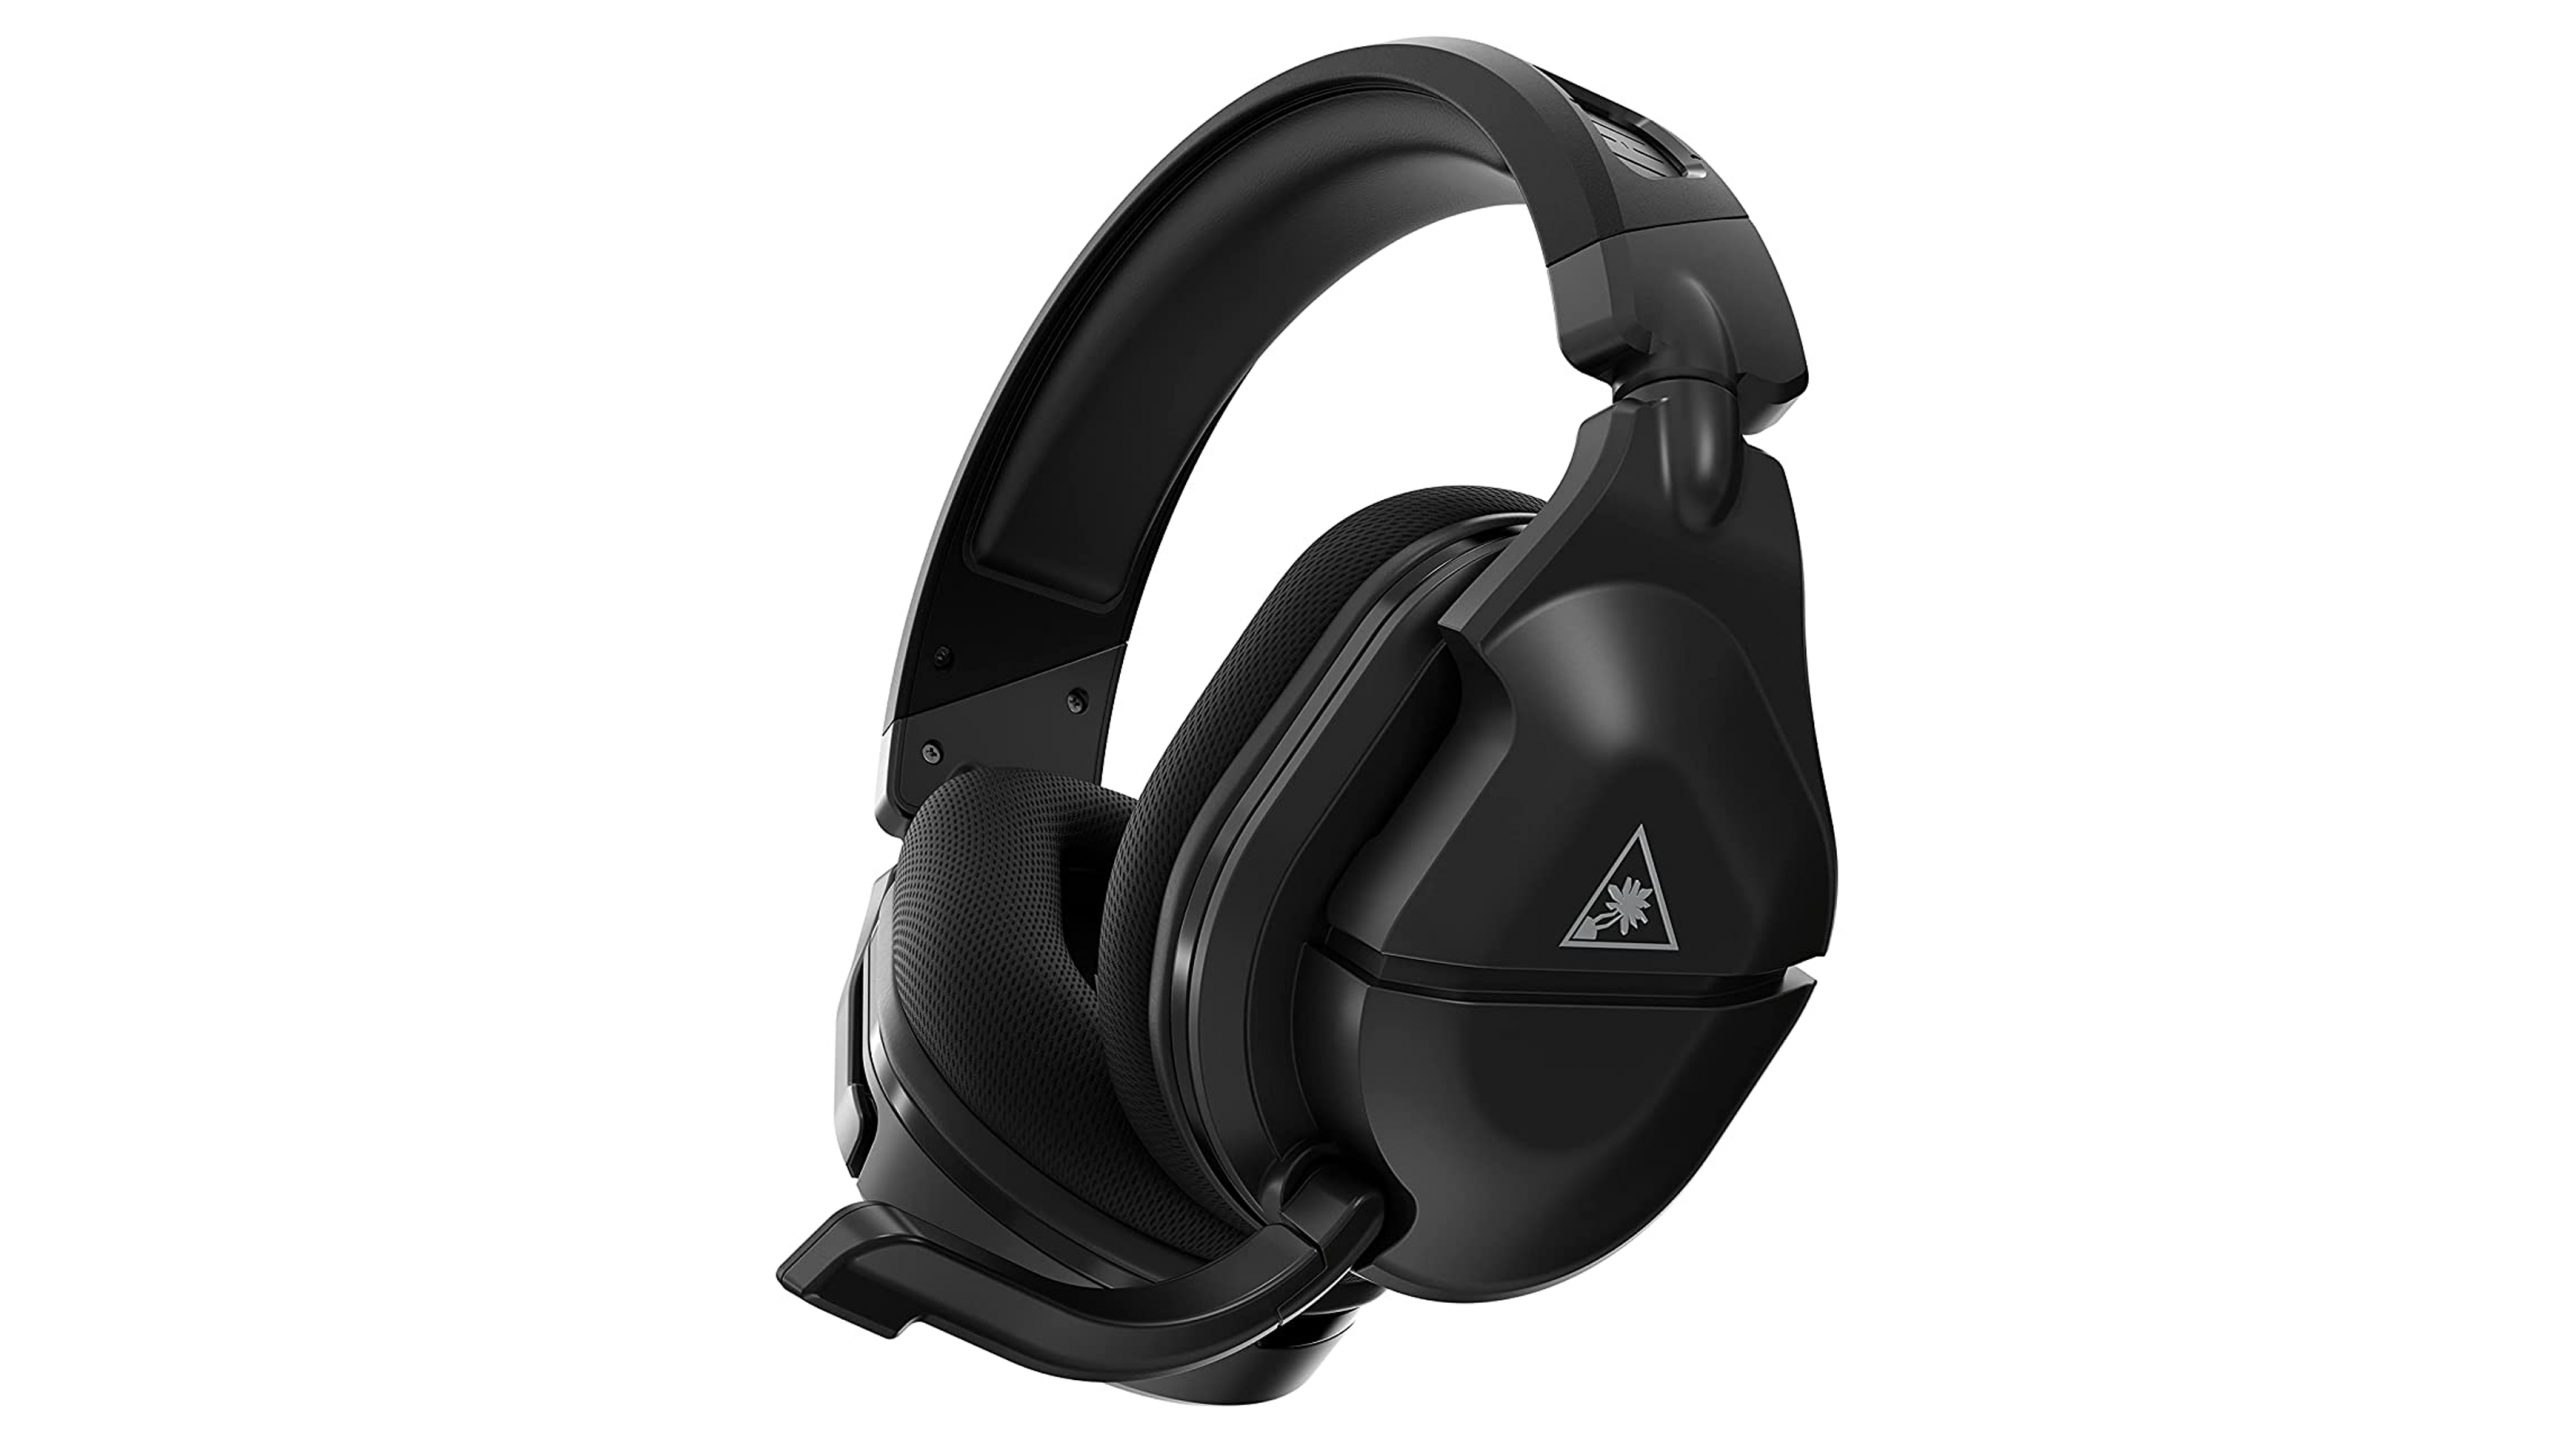 The best wireless gaming headsets for Xbox One - SoundGuys